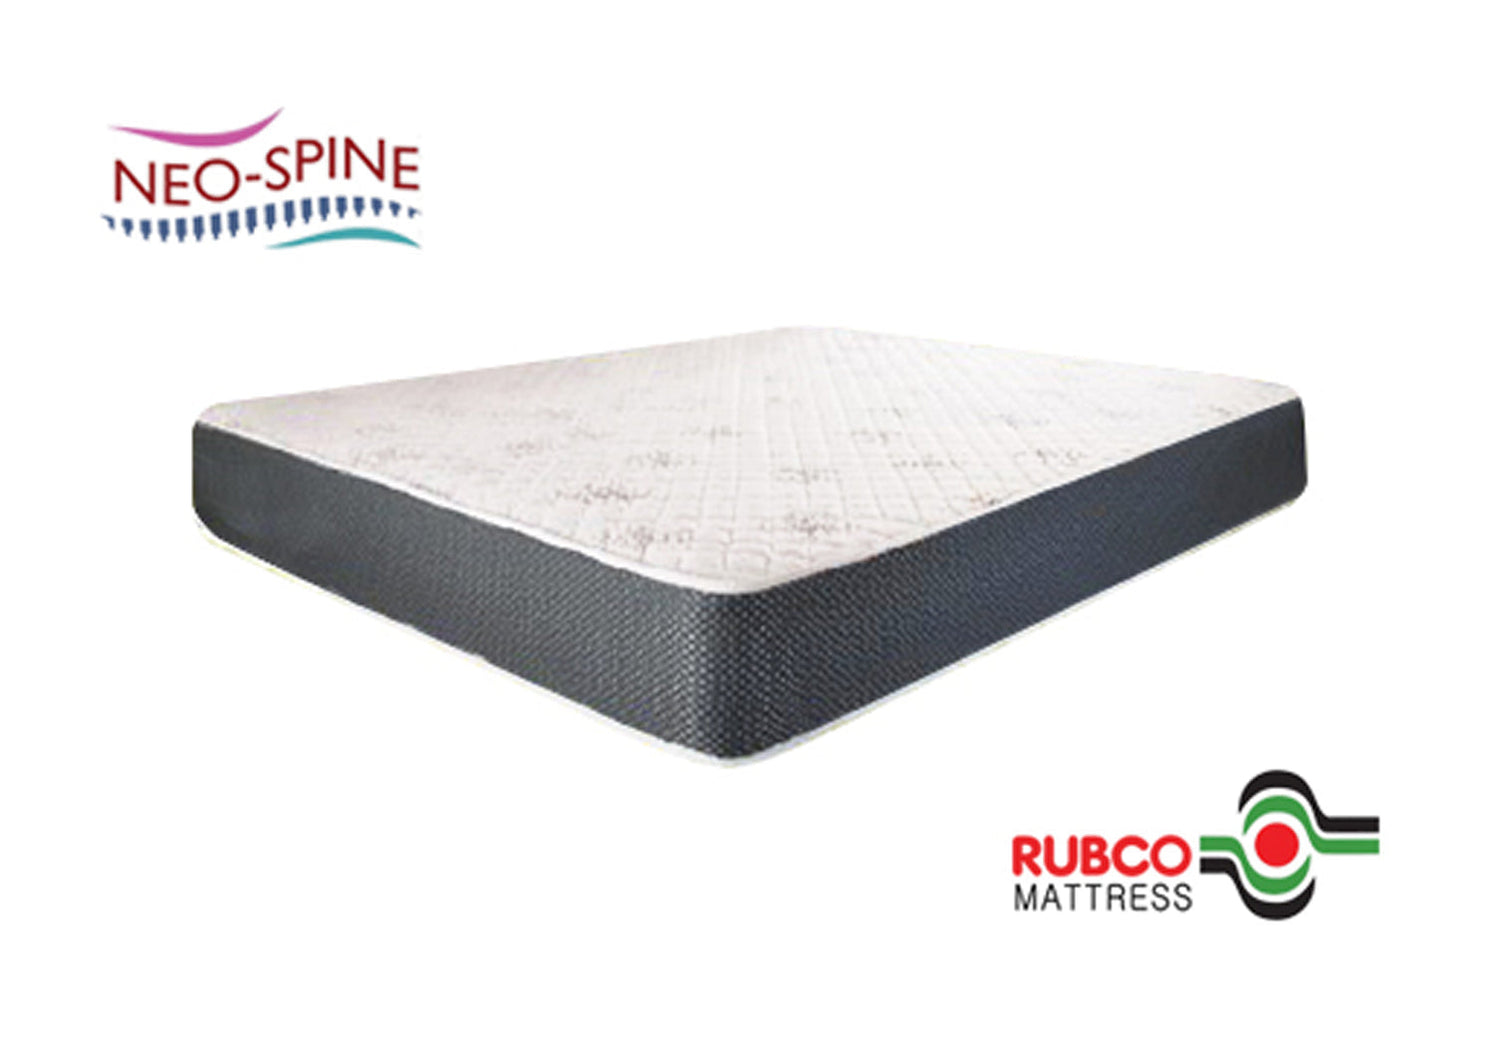 rubco mattress sizes and prices